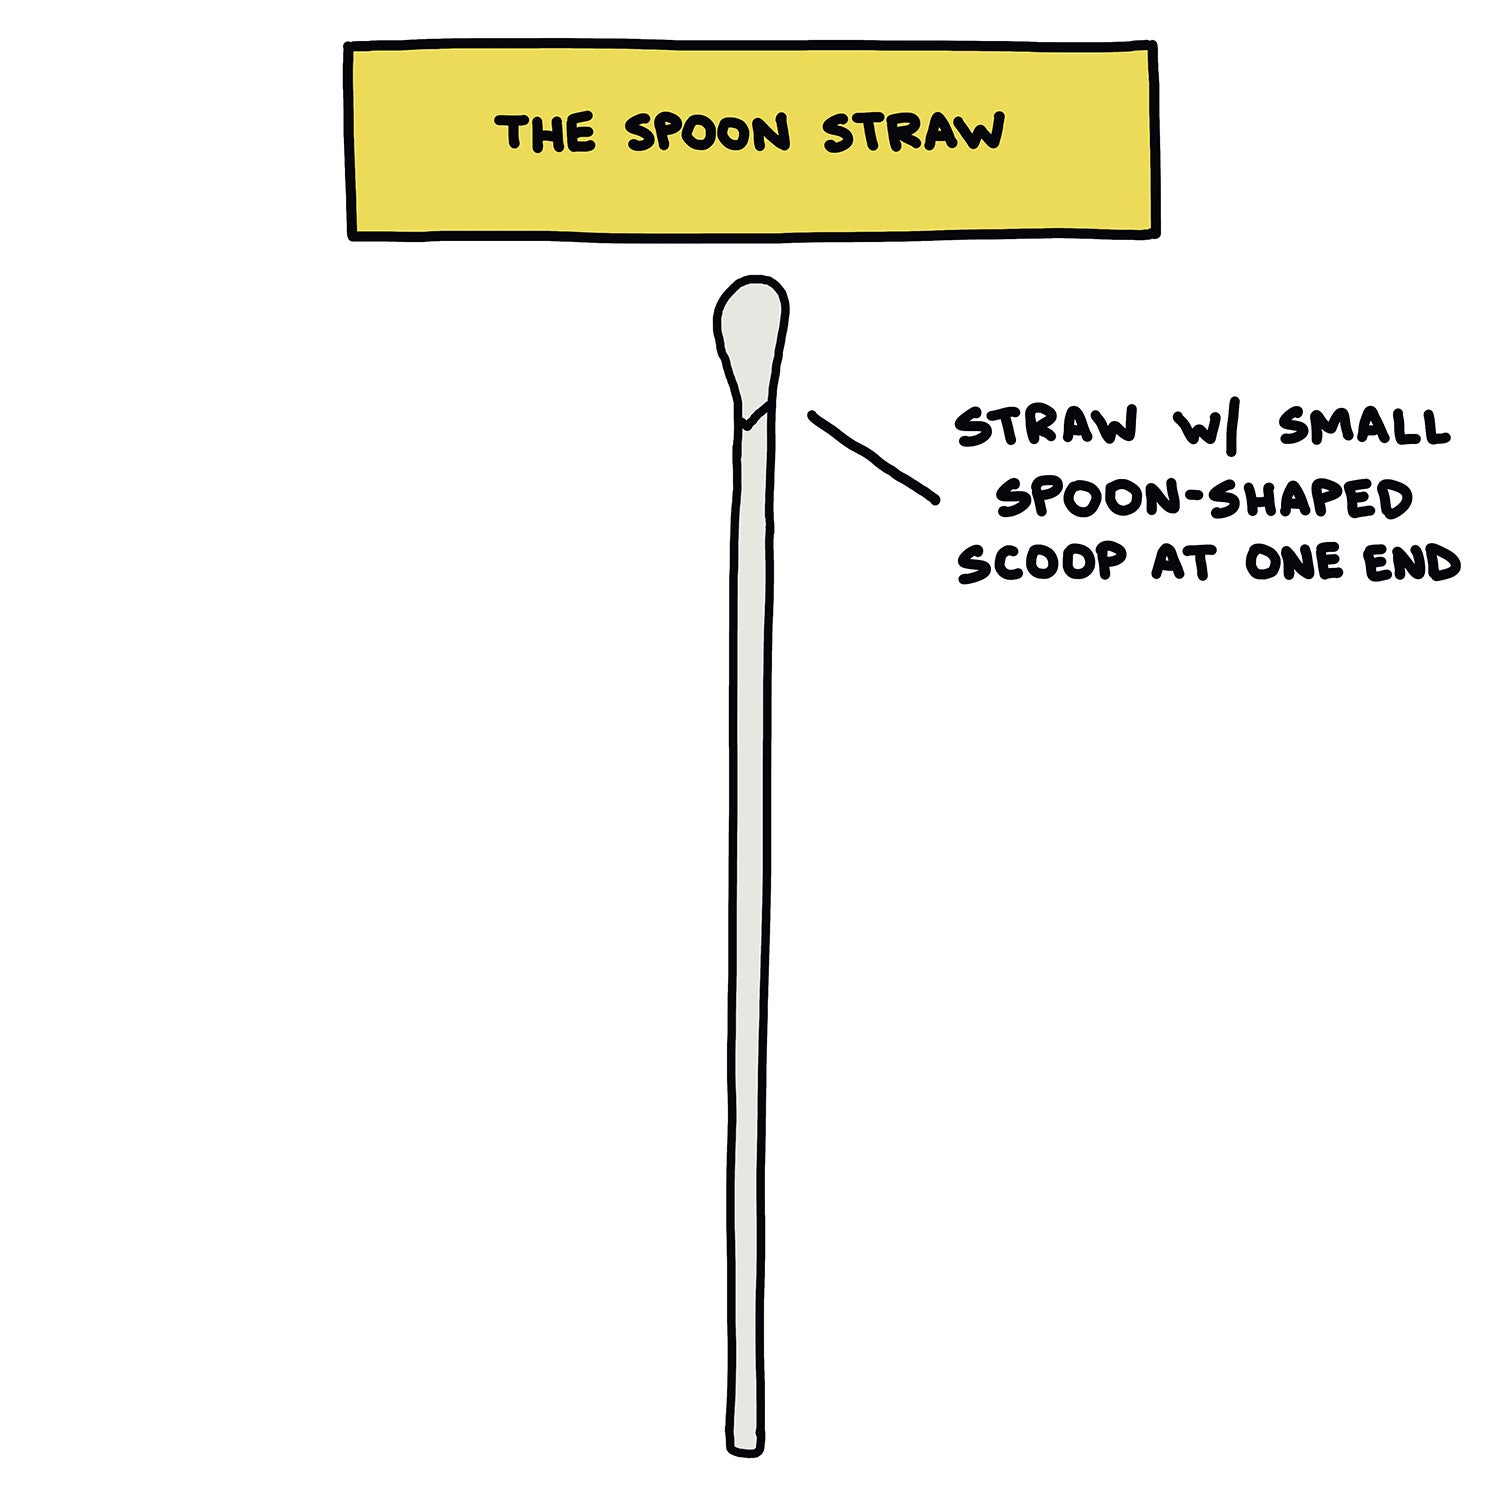 The Spoon Straw